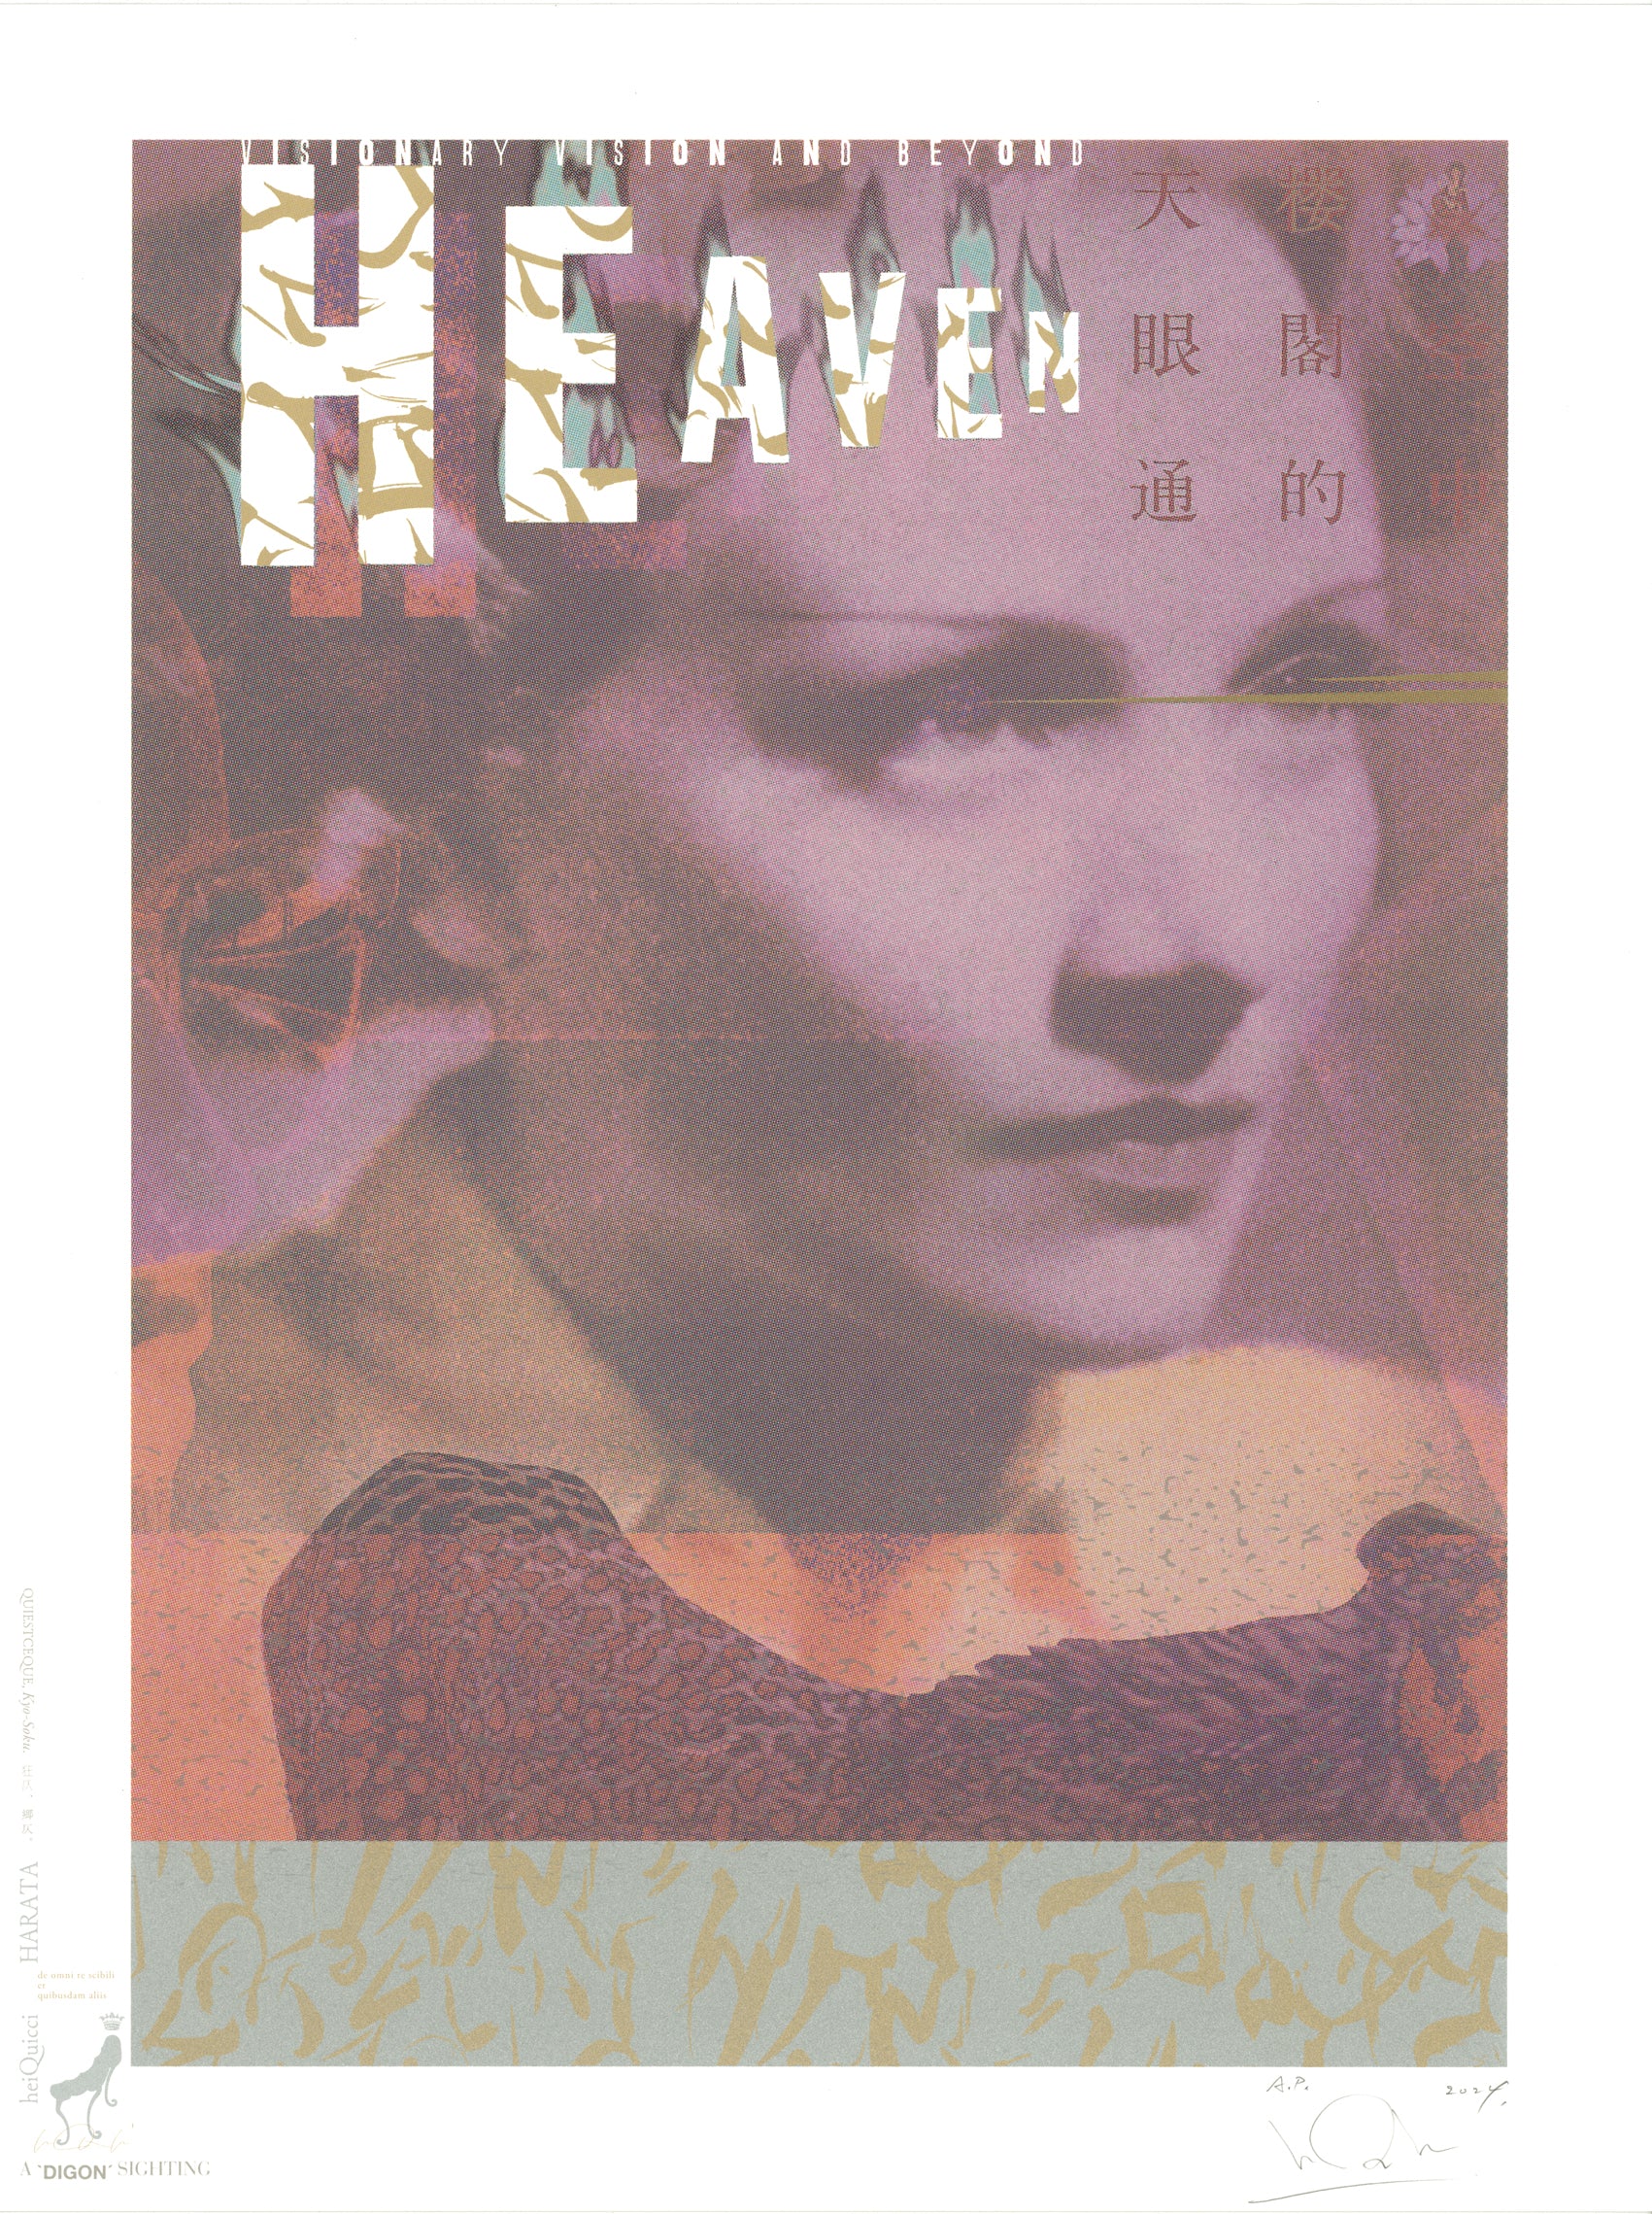 Hommage to “HEAVEN”, the magazine of Visionary Vision and Beyond.